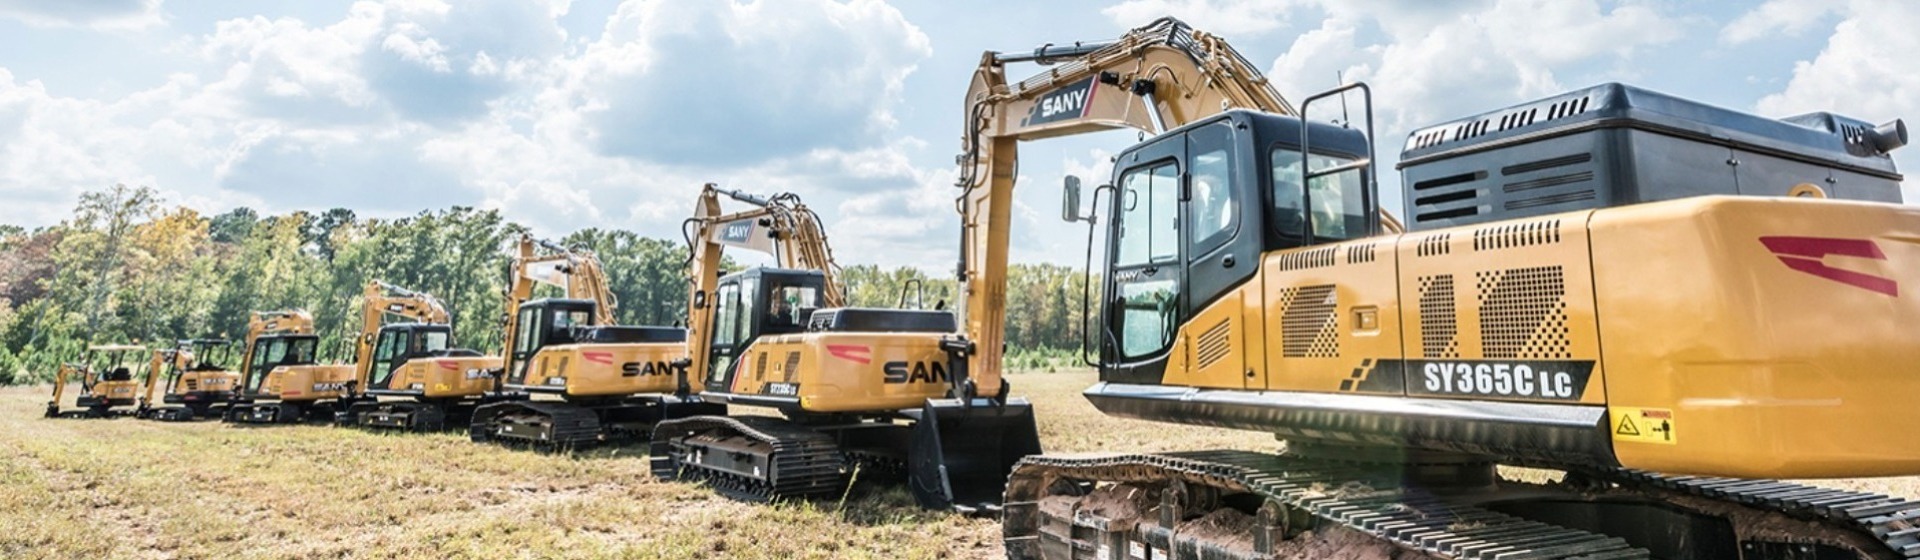 Excavator Vs. Tractor: Which Is The Best For Your Needs?